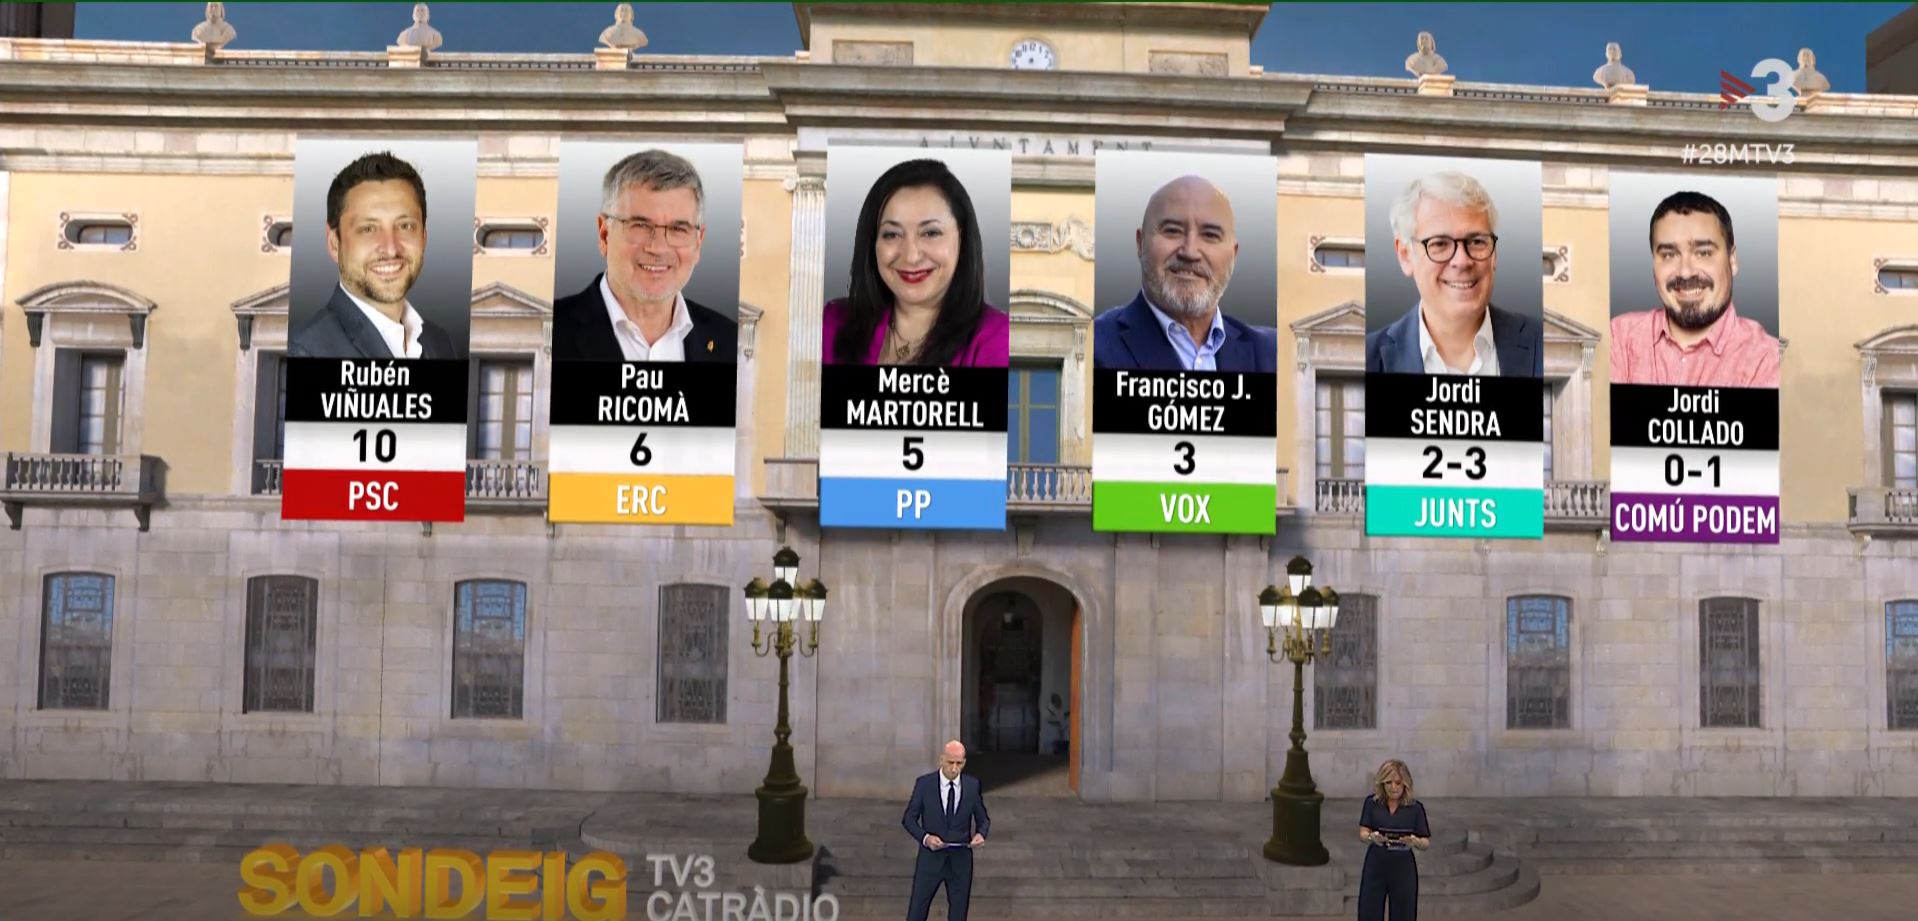 TV3's exit poll for the 2023 local elections in Tarragona